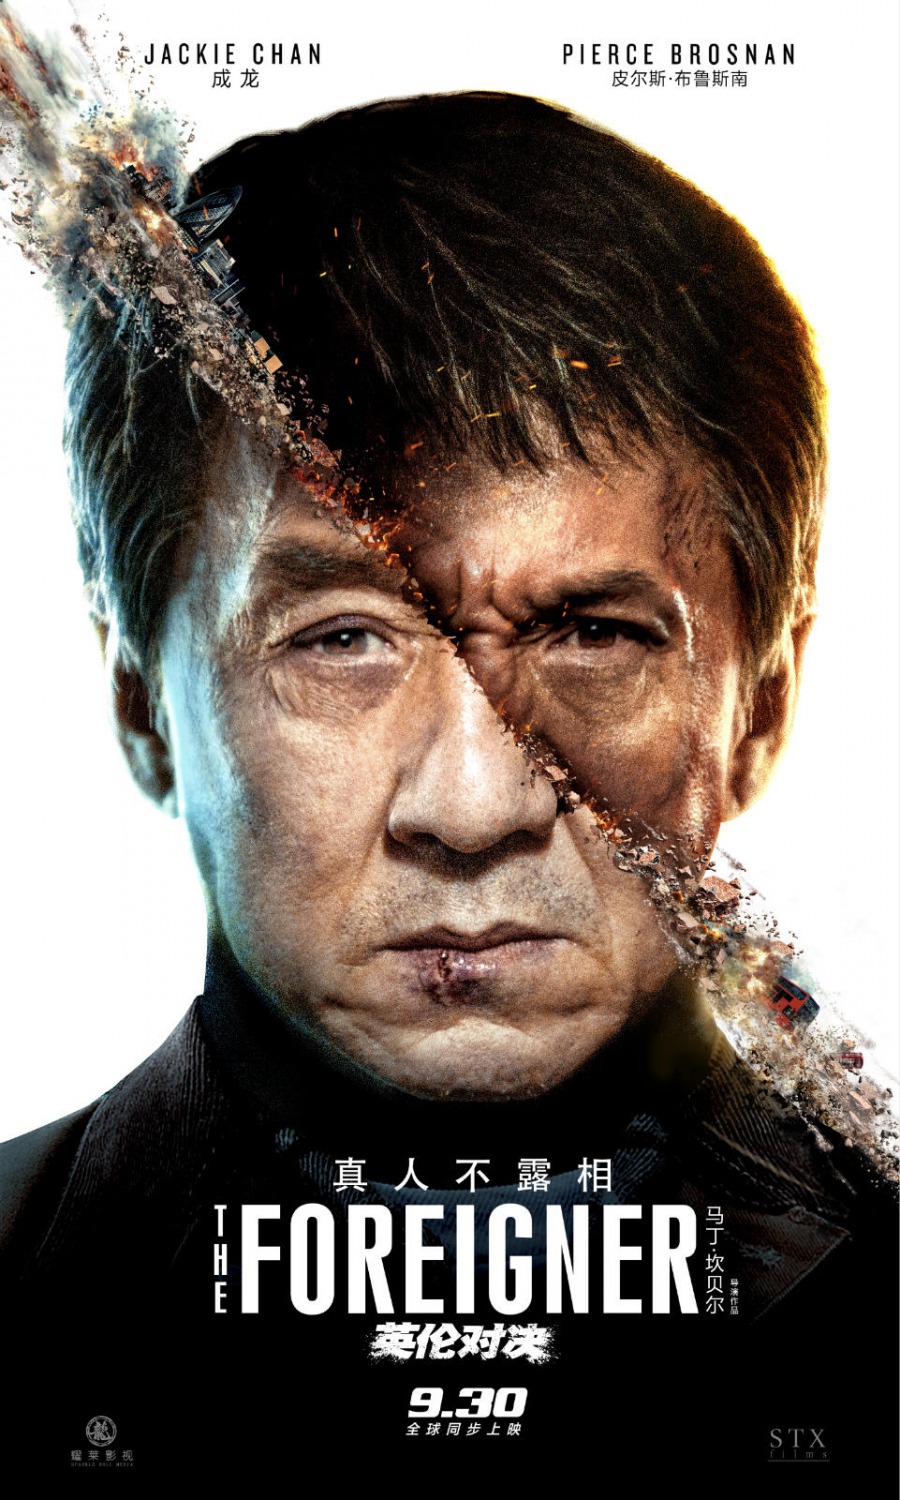 Extra Large Movie Poster Image for The Foreigner (#4 of 14)